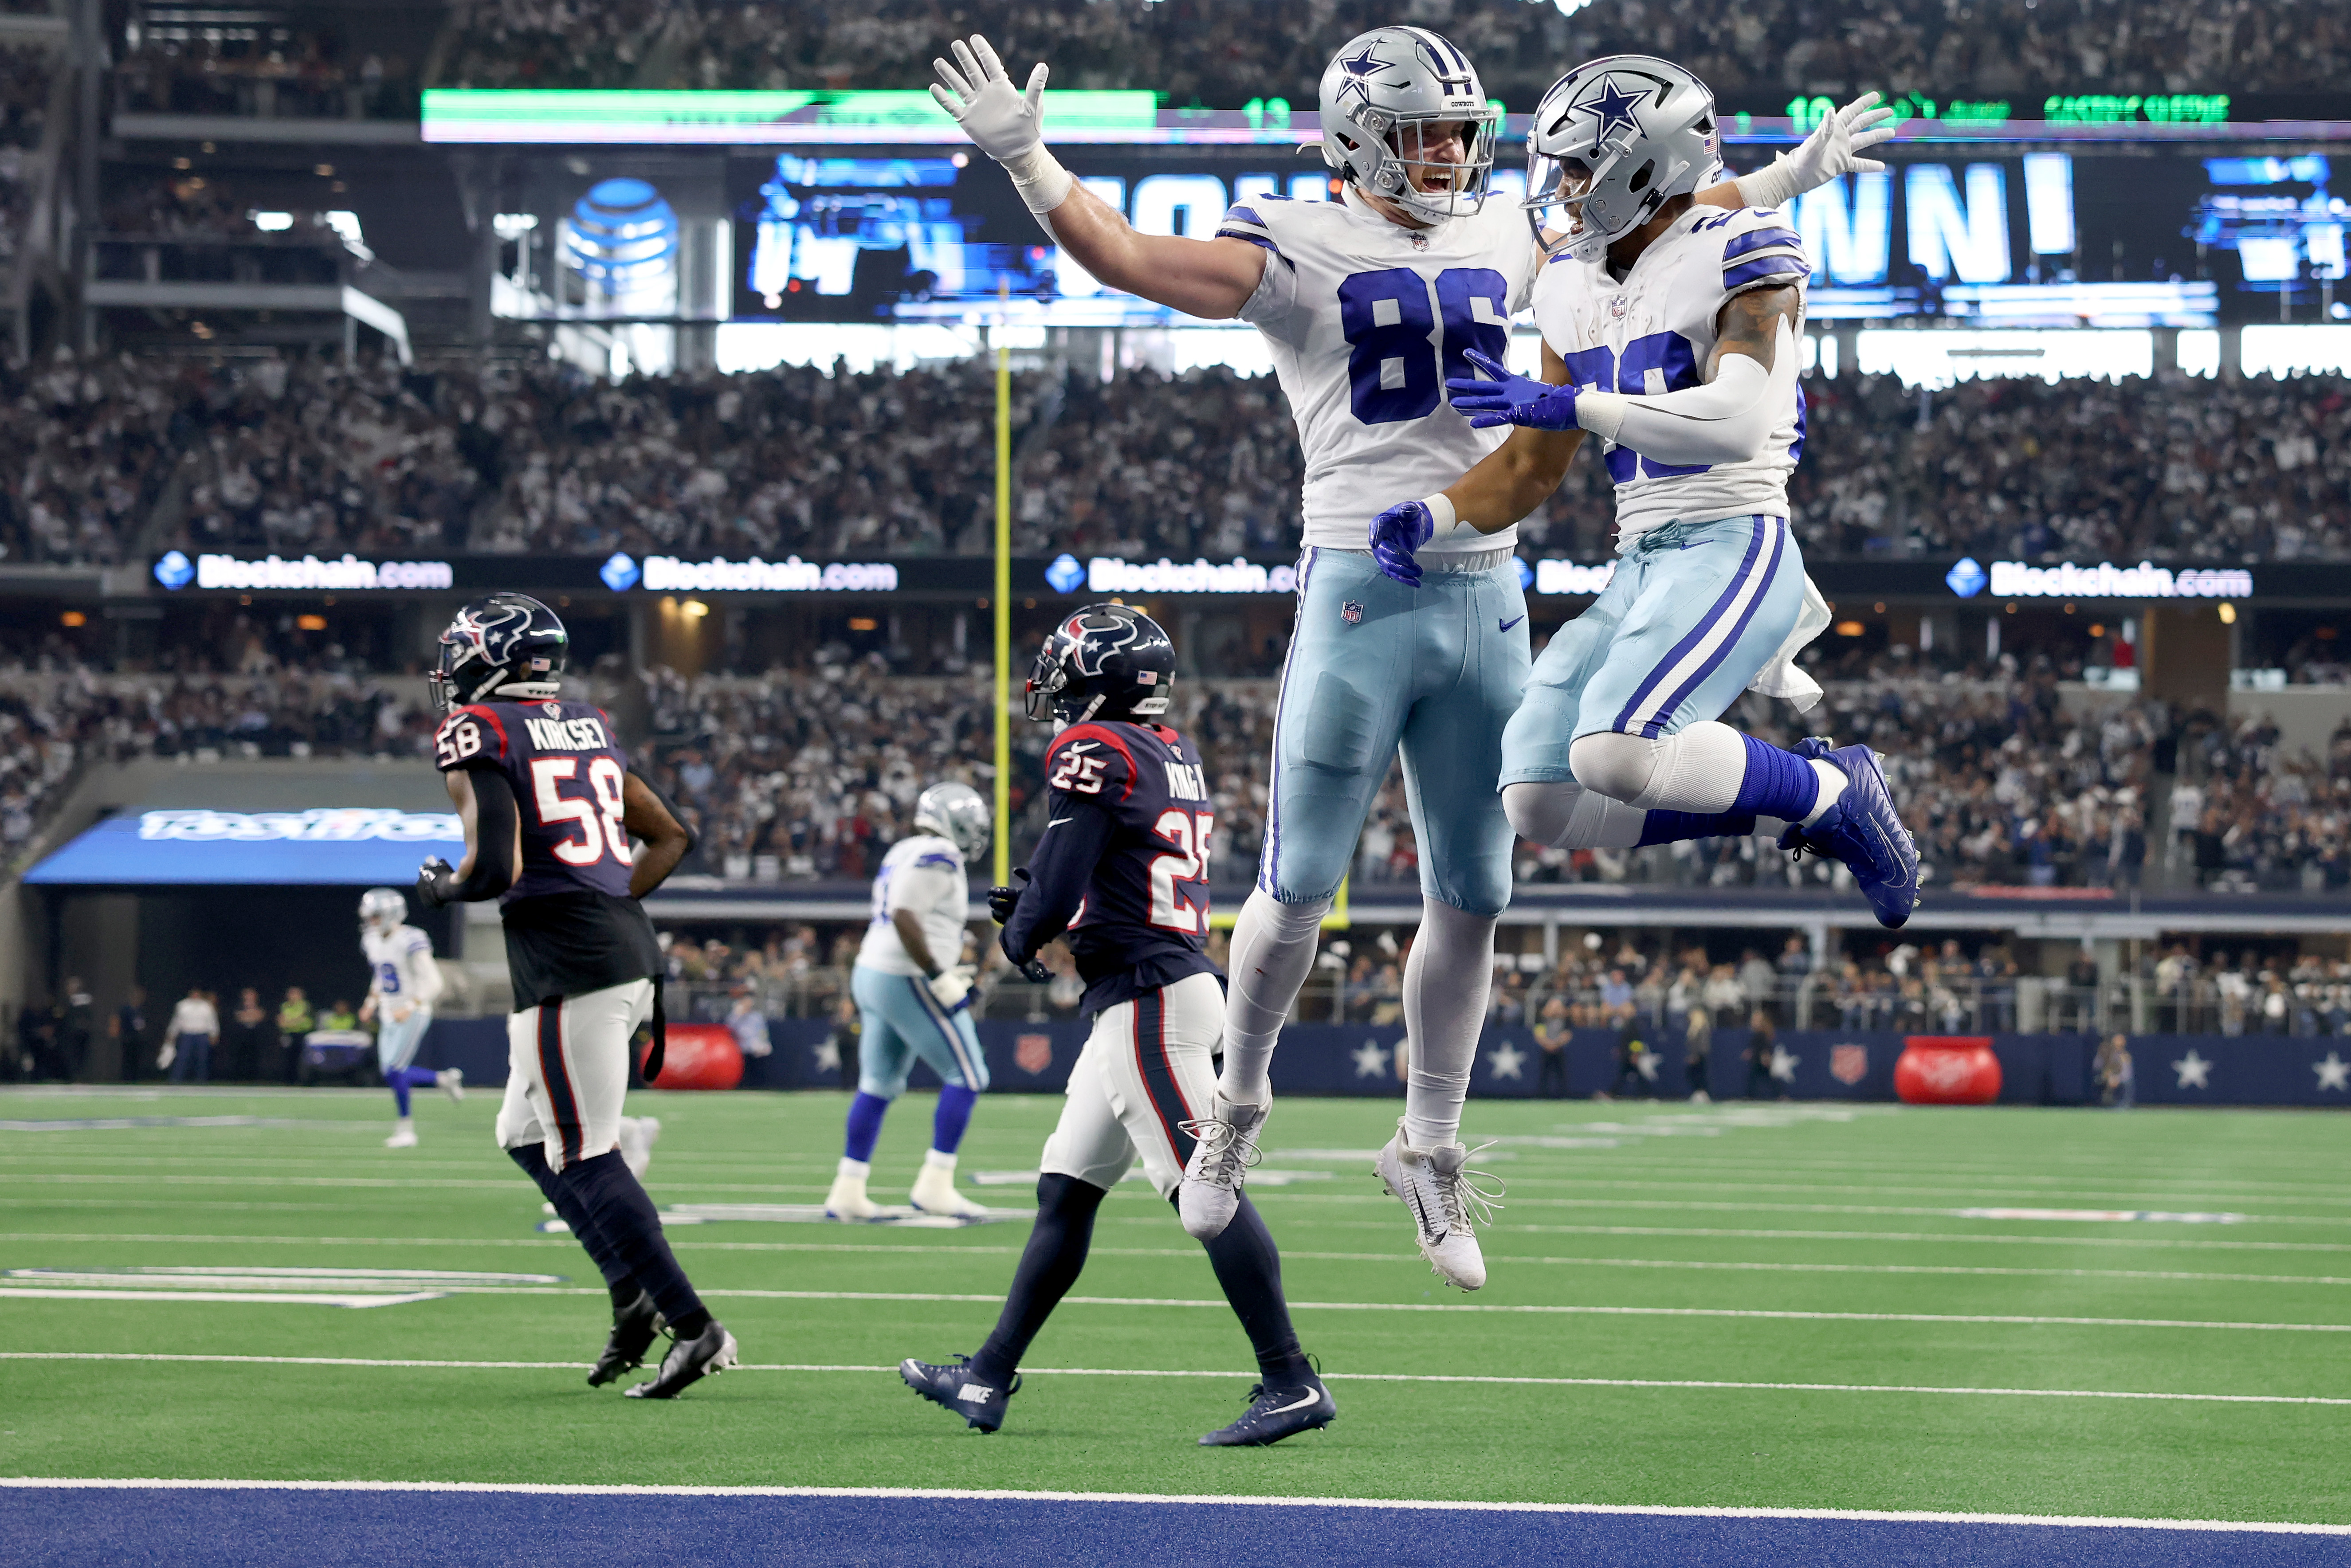 Cowboys' struggles are concerning, but more important tests lie ahead